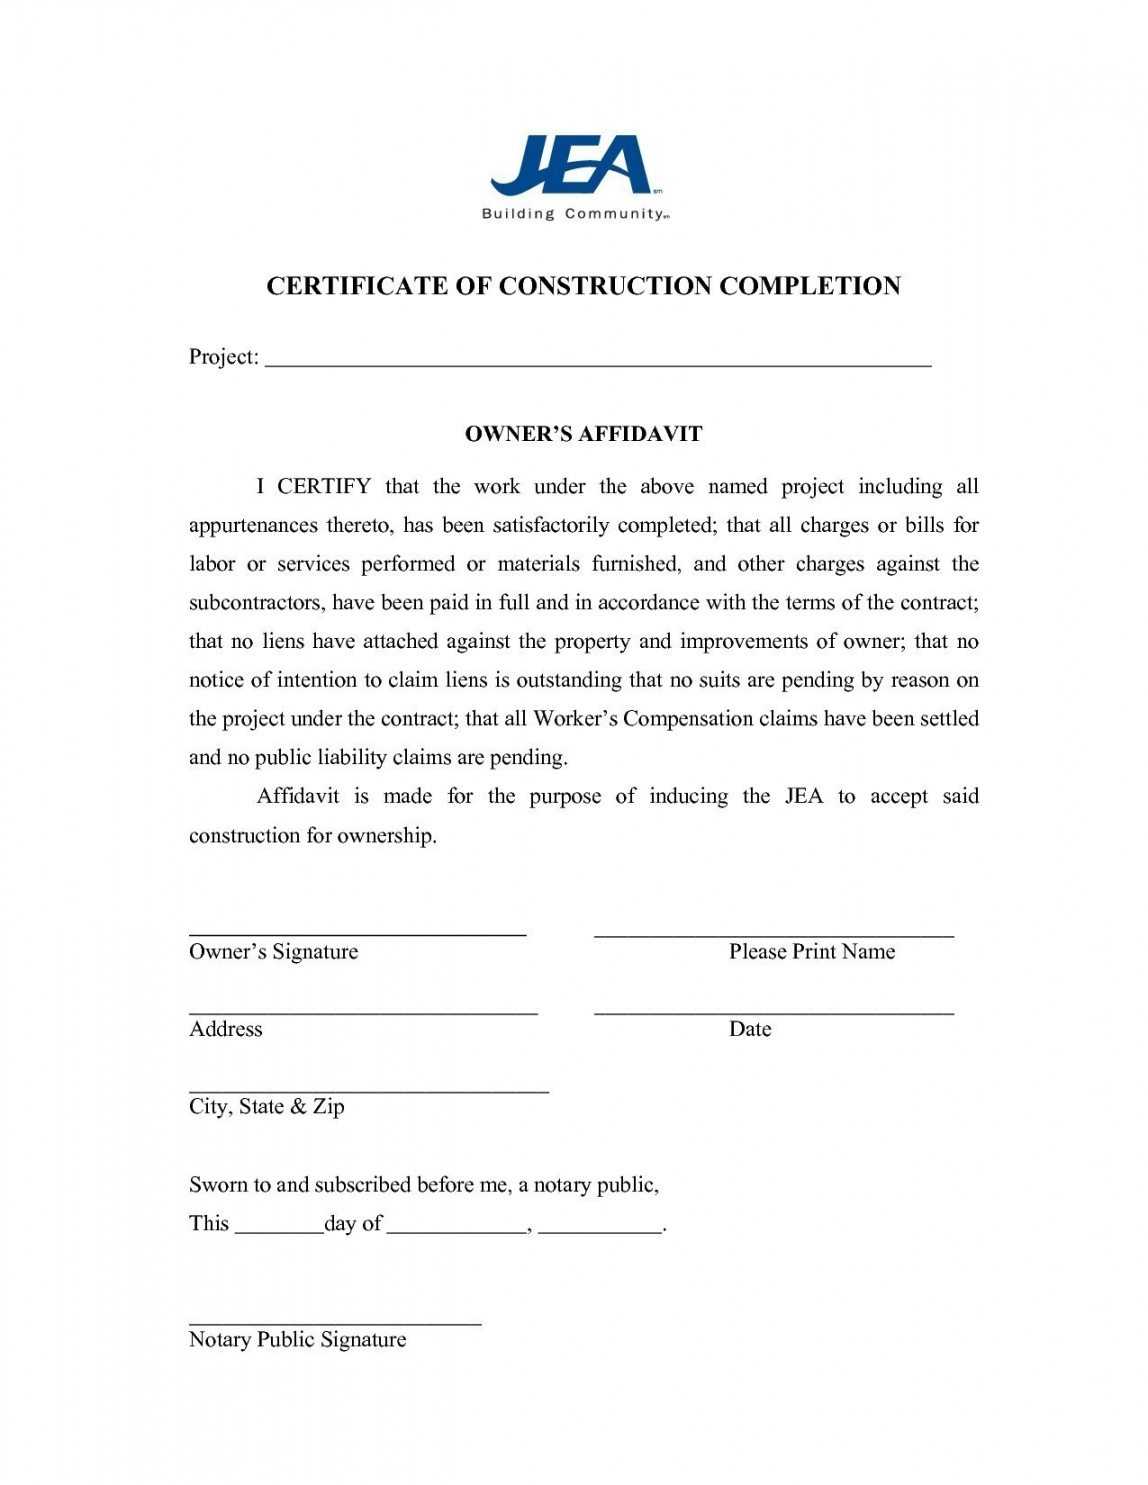 Free Project Completion Certificate Rmat In Word Template With Regard To Construction Certificate Of Completion Template